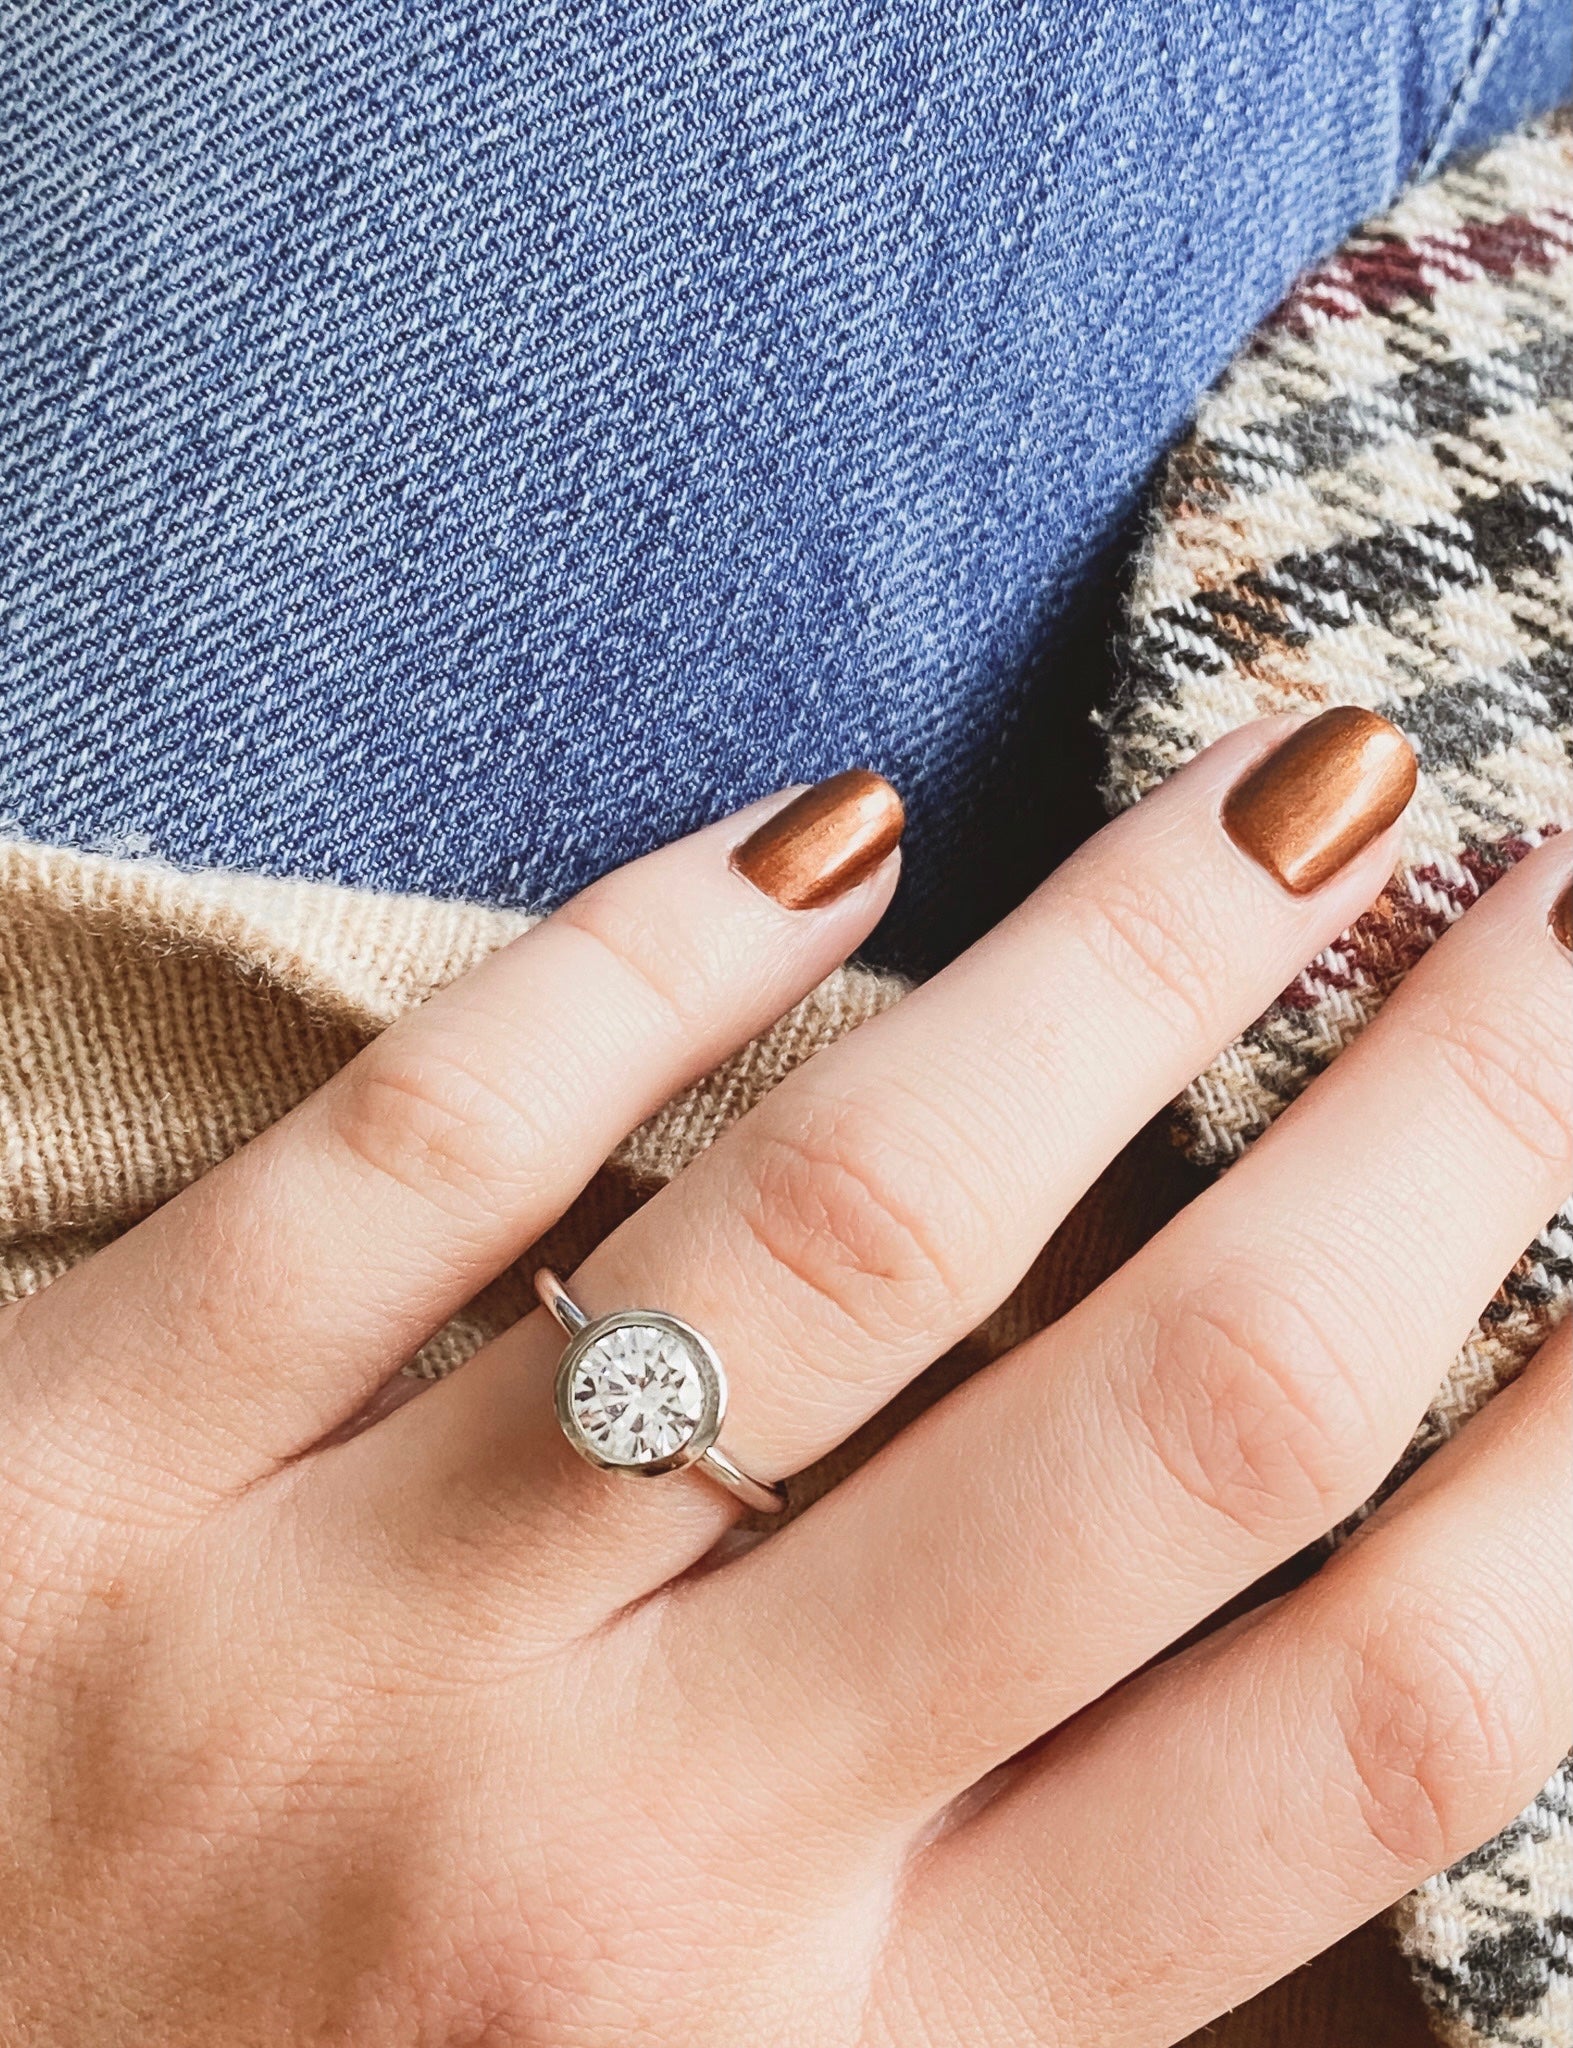 Bella Swan's engagement ring sparkles as much as Edward Cullen – VISIT